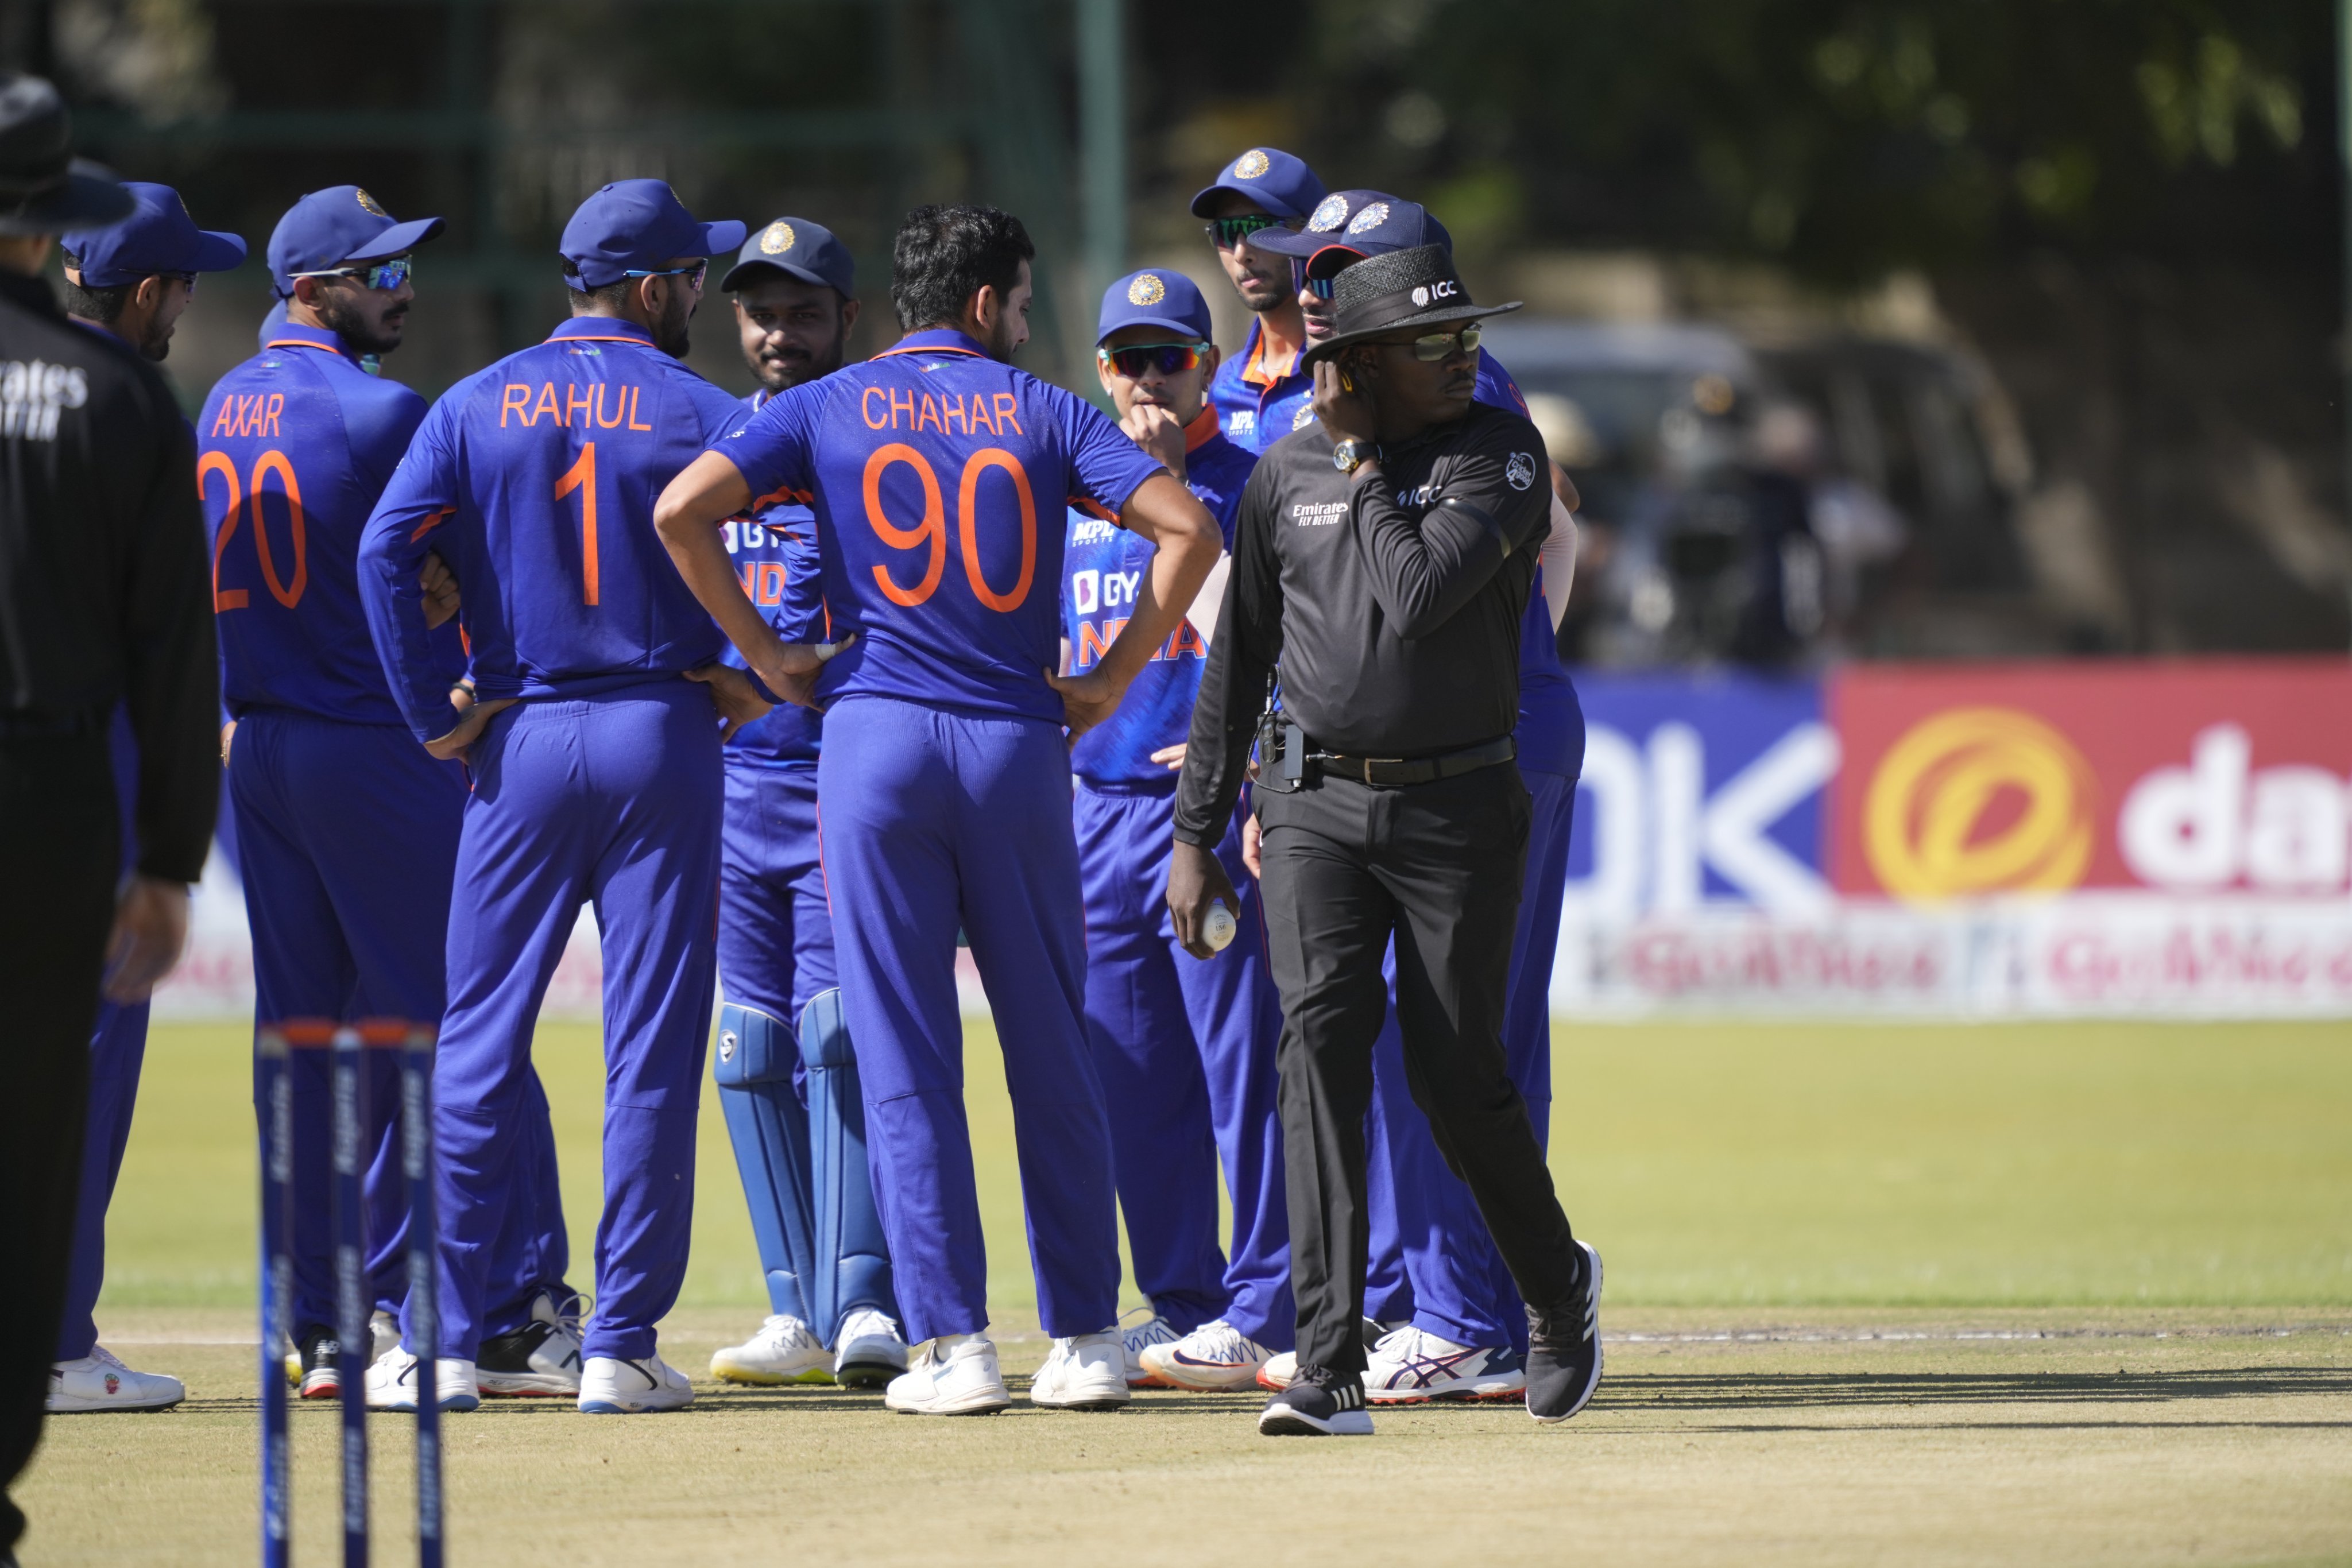 Clinical India outplay Zimbabwe, win first ODI by 10 wickets to take 1-0 lead